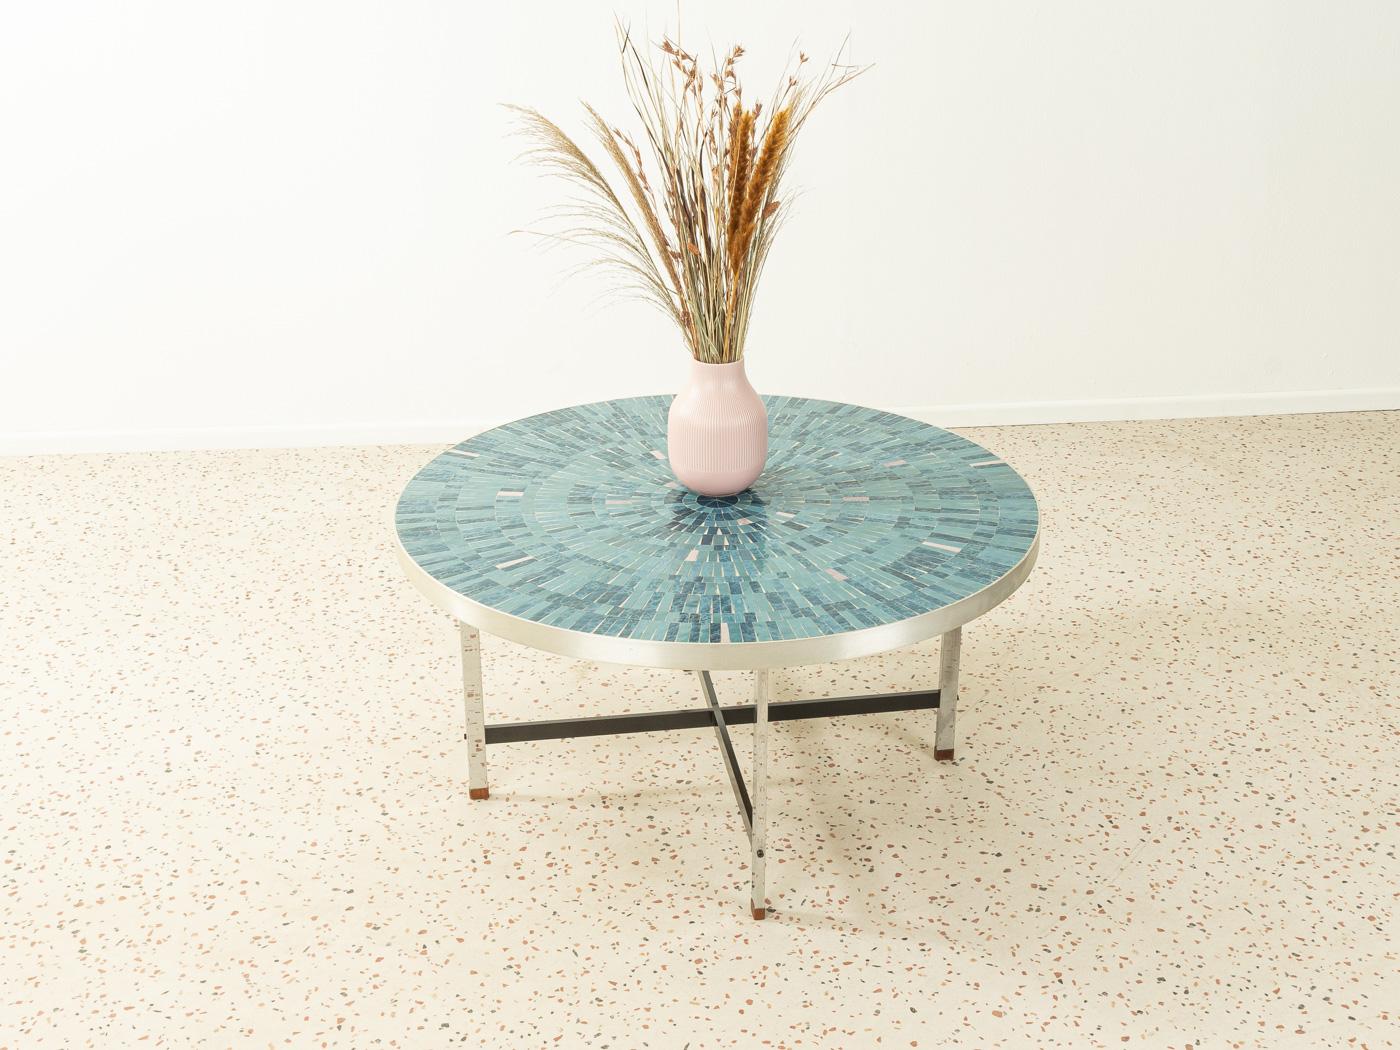 Unique coffee table from the 1960s. High quality table top with steel border, a mosaic in blue, turquoise and grey and chrome legs.

Quality features:
- Very good workmanship
- High-quality materials
- Made in Germany, Designer: Berthold Müller